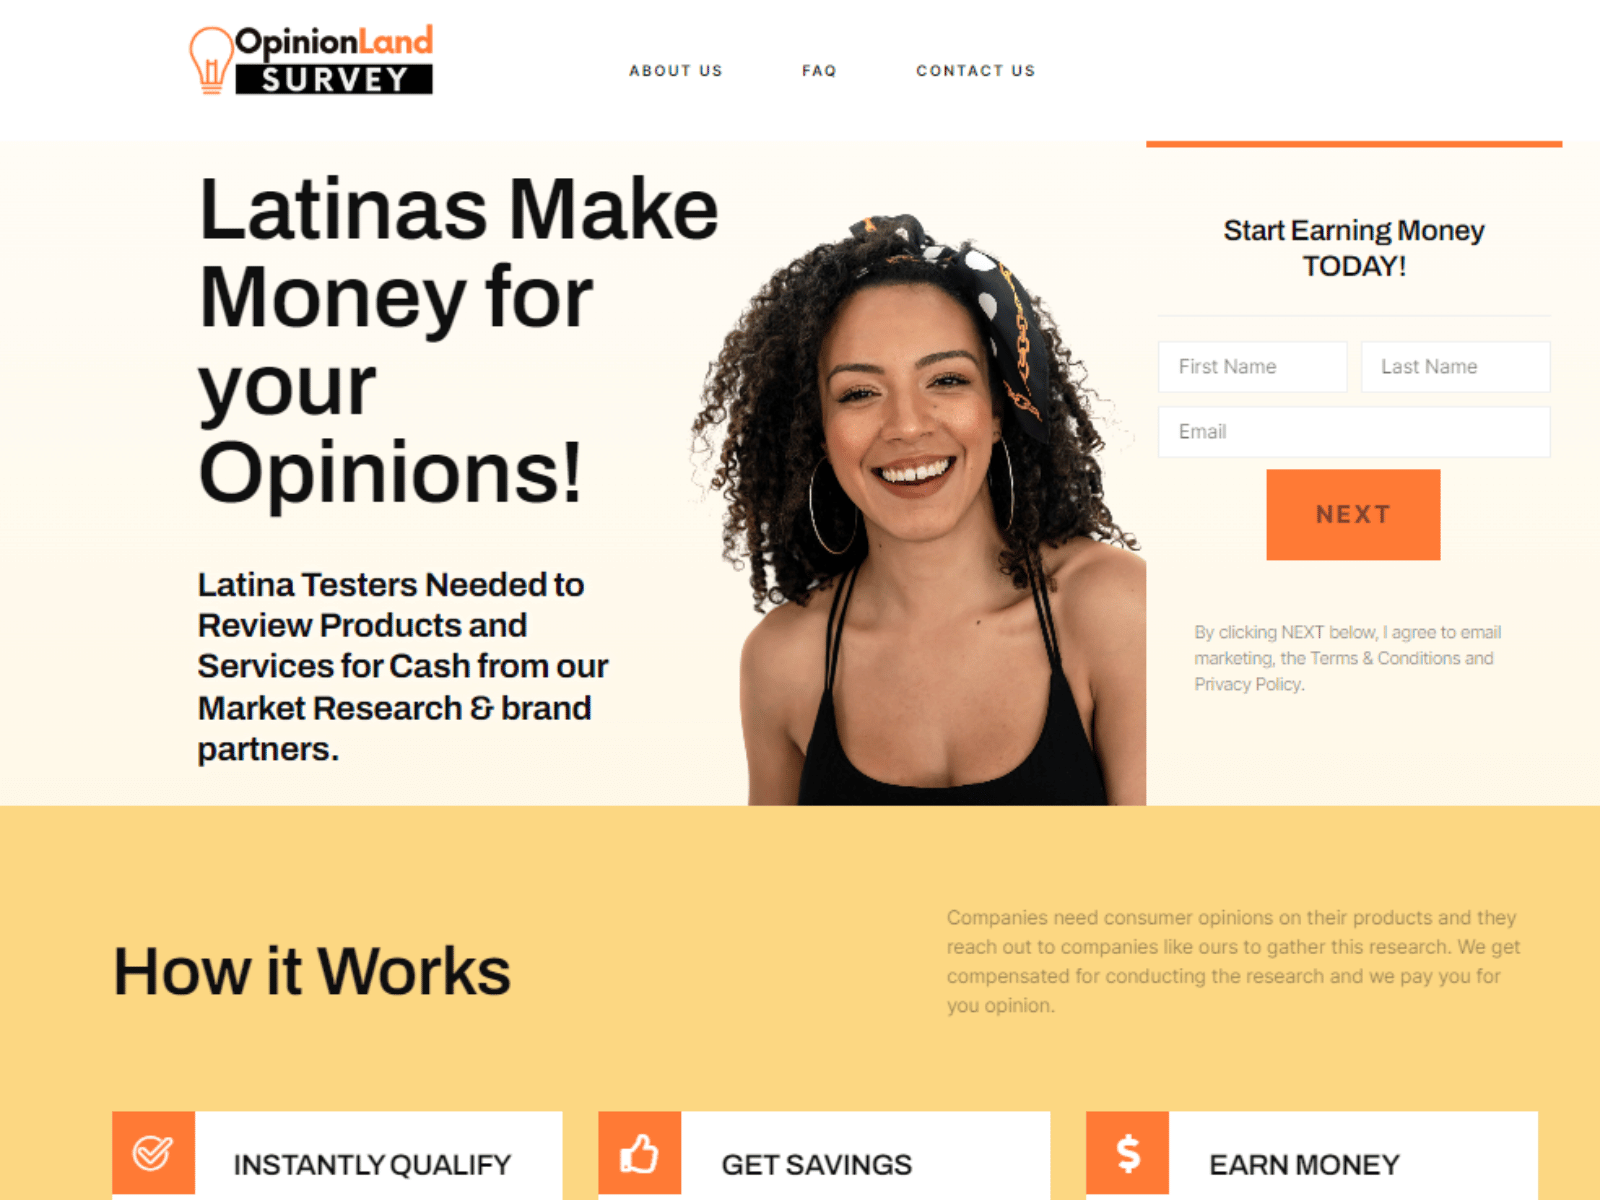 Case Study - Hispanic Panelists for Market Research Agency - Opinionland LP